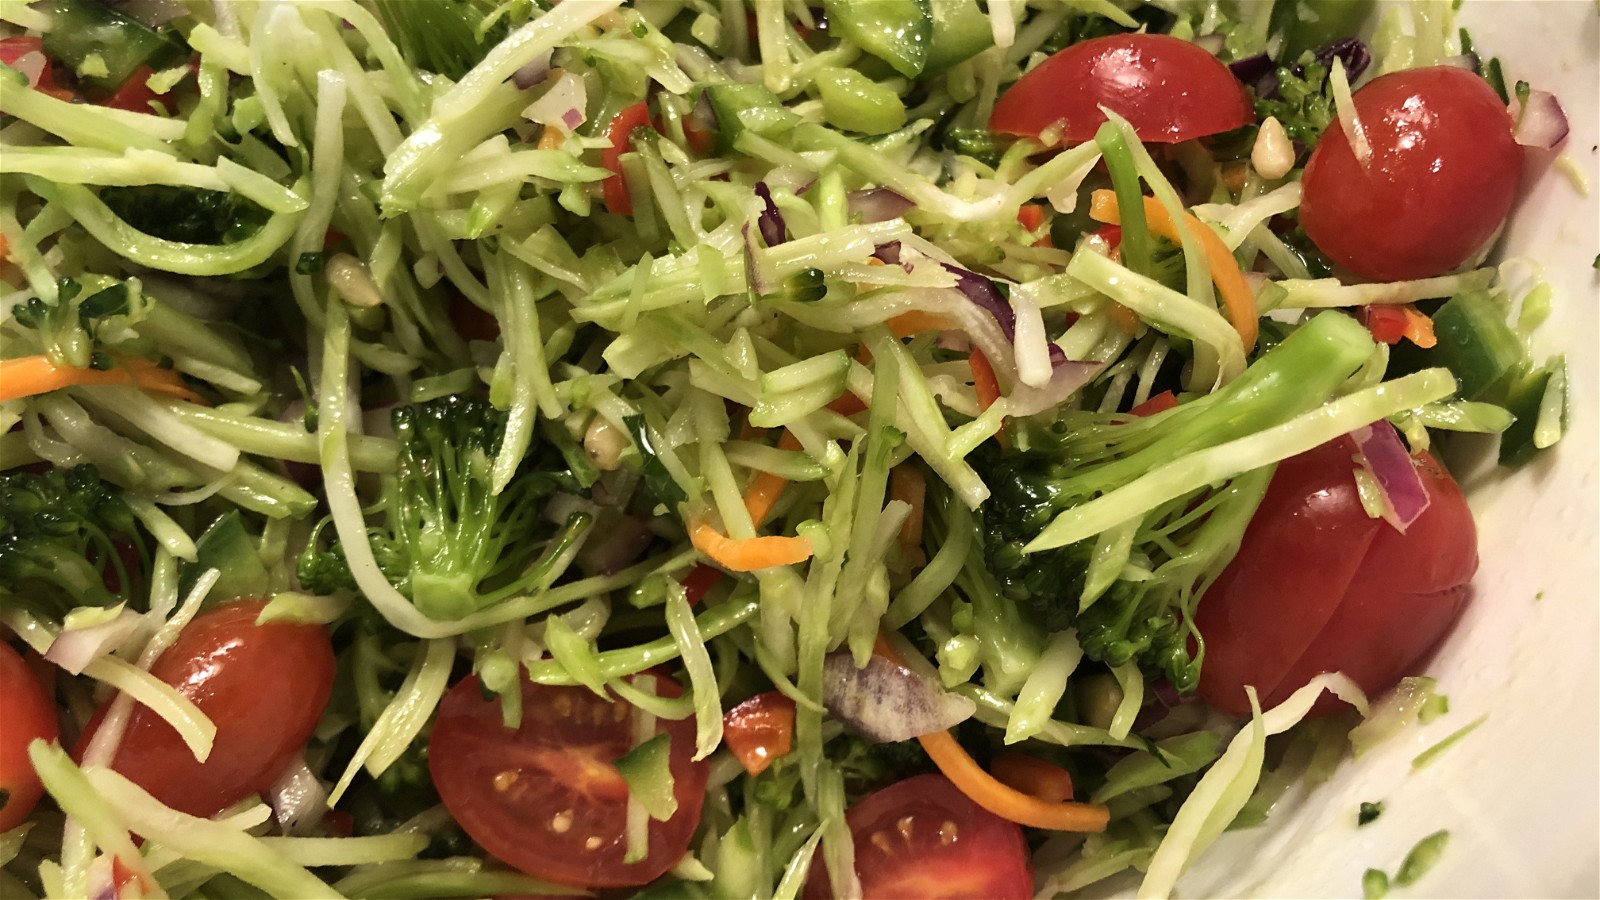 Image of Broccoli Slaw with Citrus Dressing